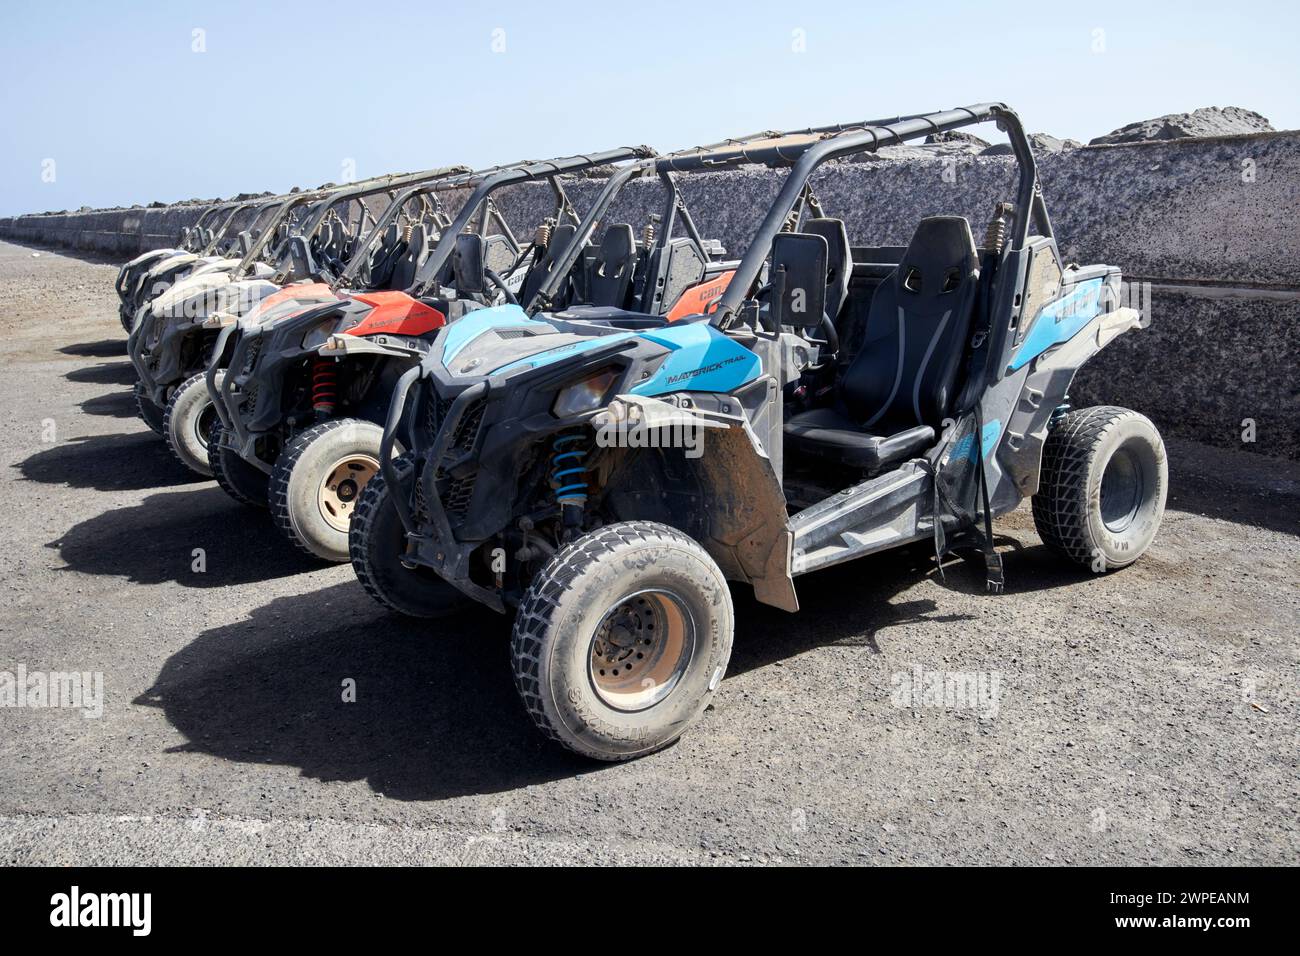 can-am maverick trail adventure buggies for hire as part of off road tour Costa Teguise, Lanzarote, Canary Islands, spain Stock Photo